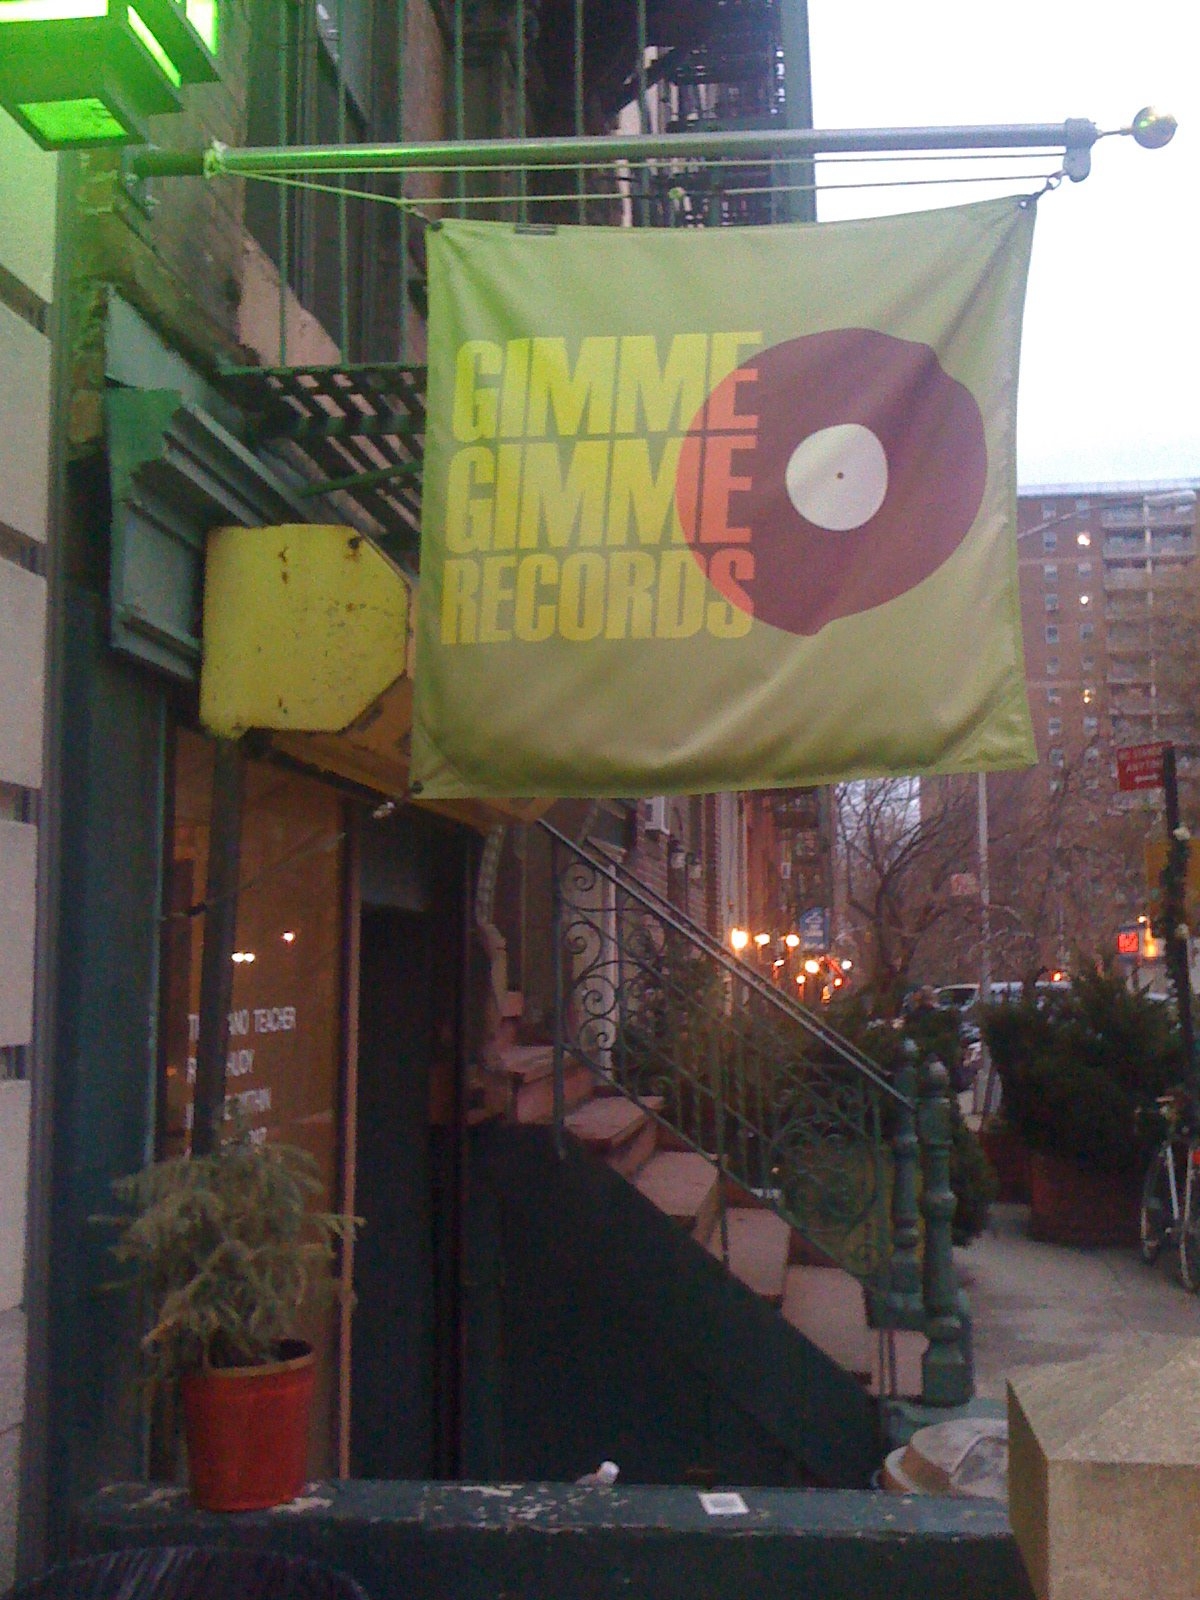 Gimme Gimme Records 